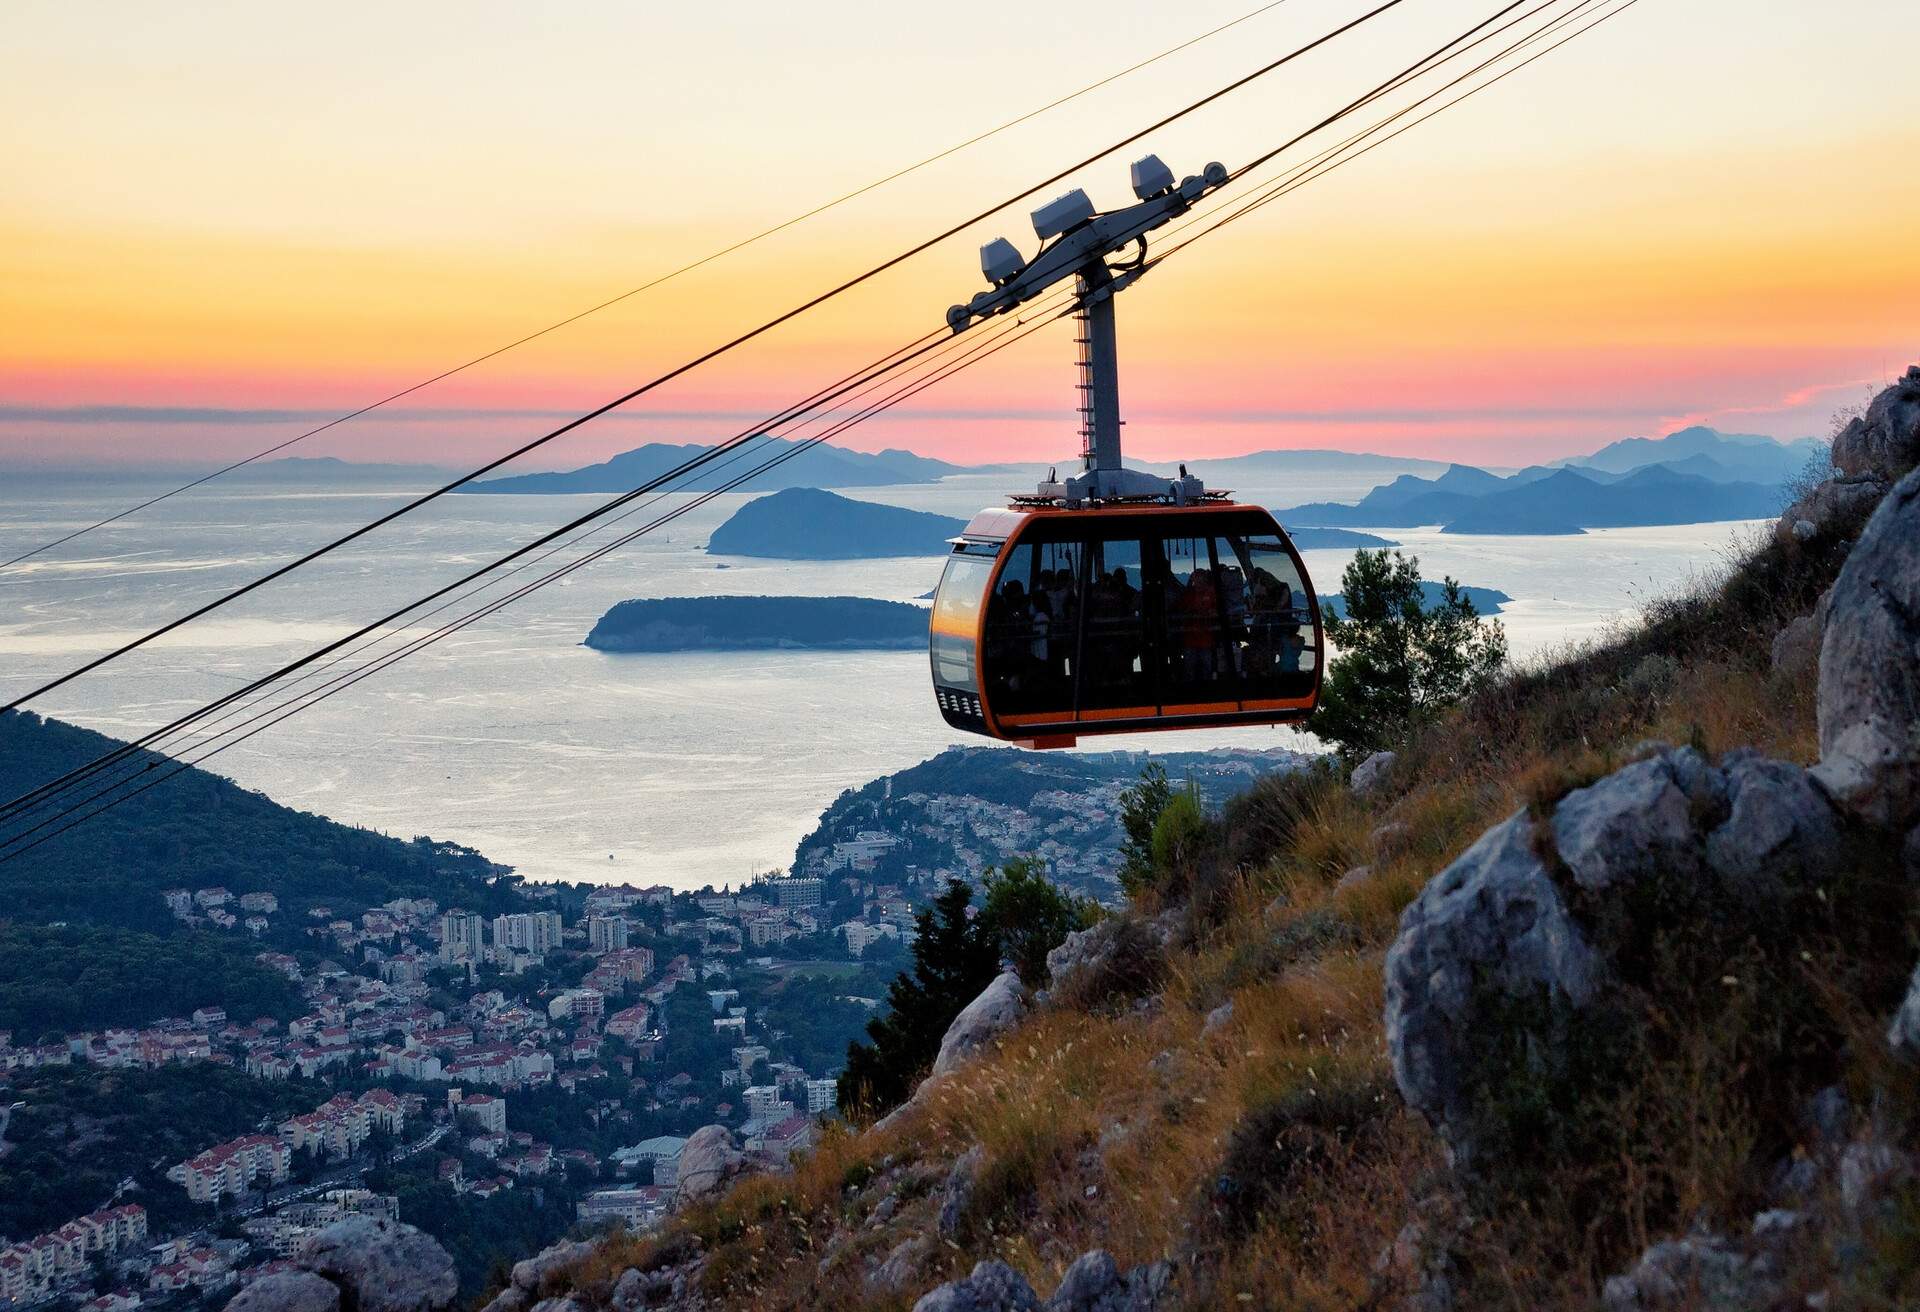 Cabin of cableway and ancient town of Dubrovnik at sunset on the background, Croatia